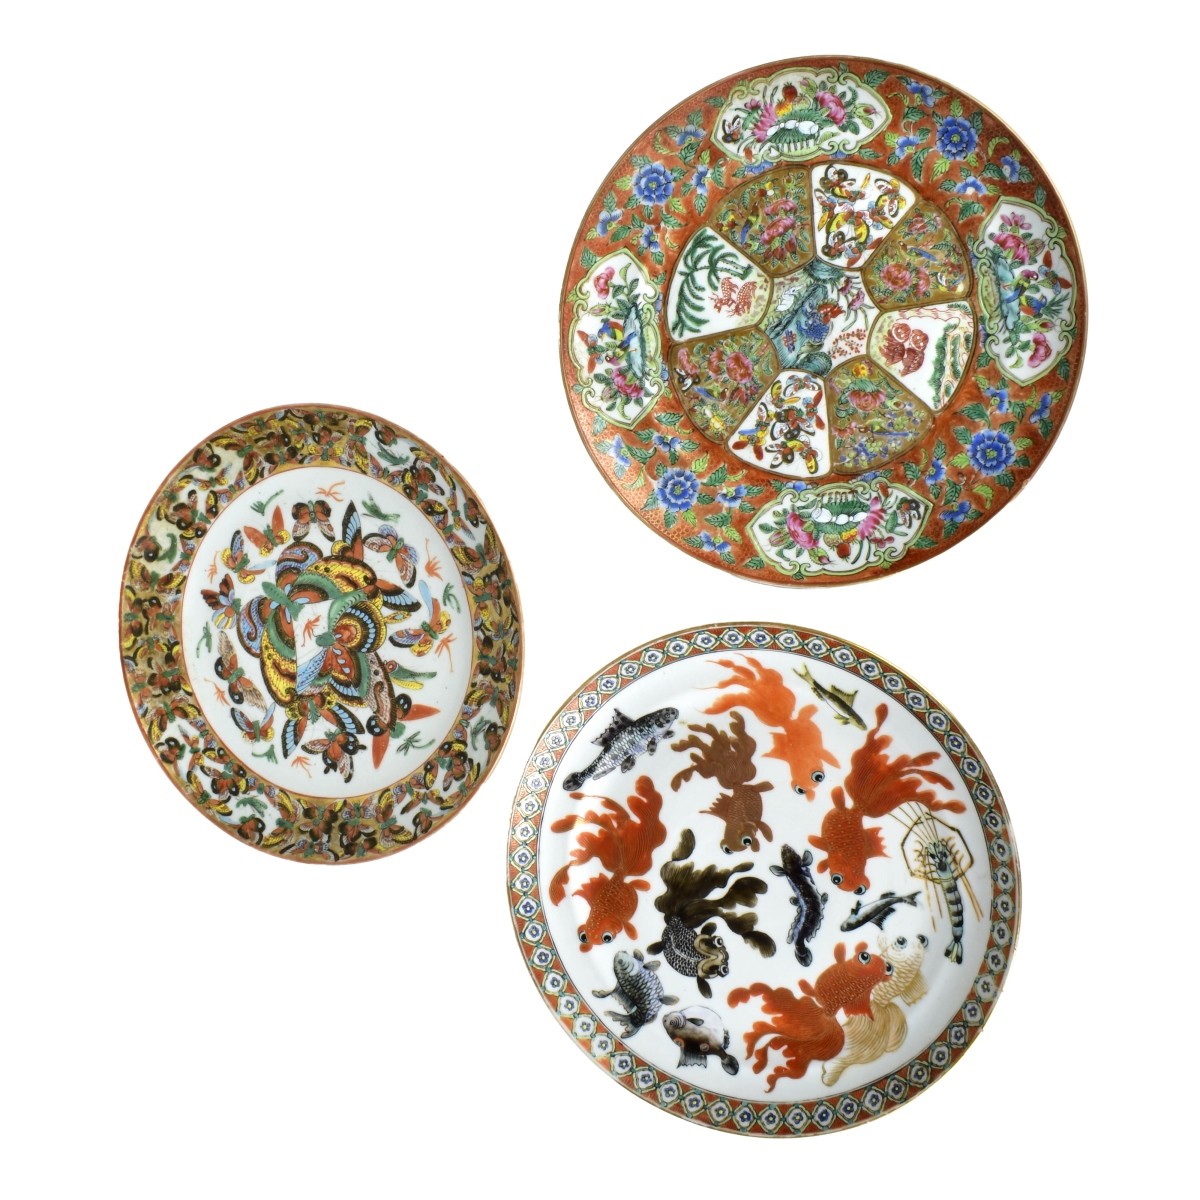 Three Chinese Export Porcelain Plates